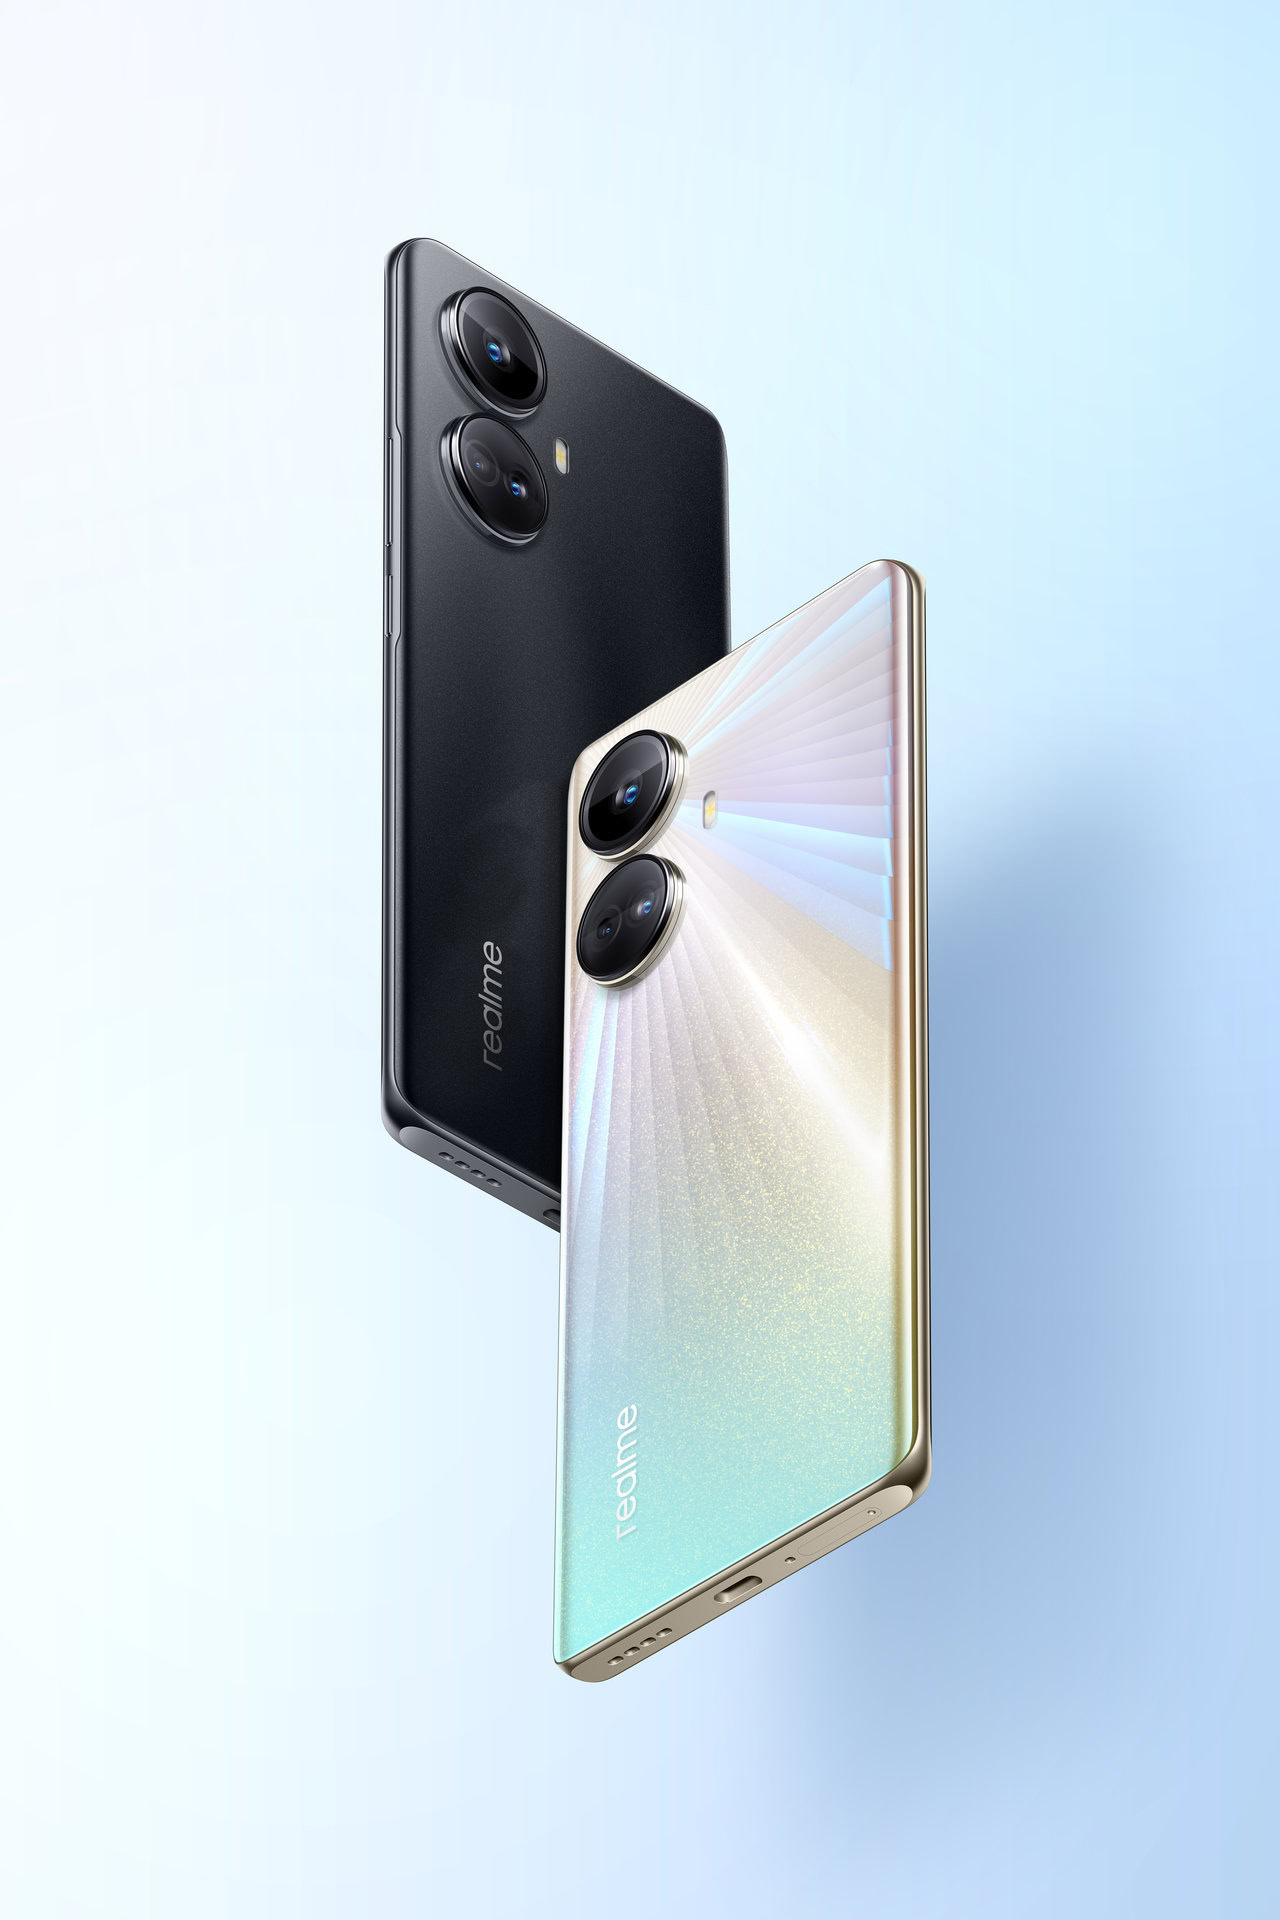 Realme 10 launched globally, priced starting at $229